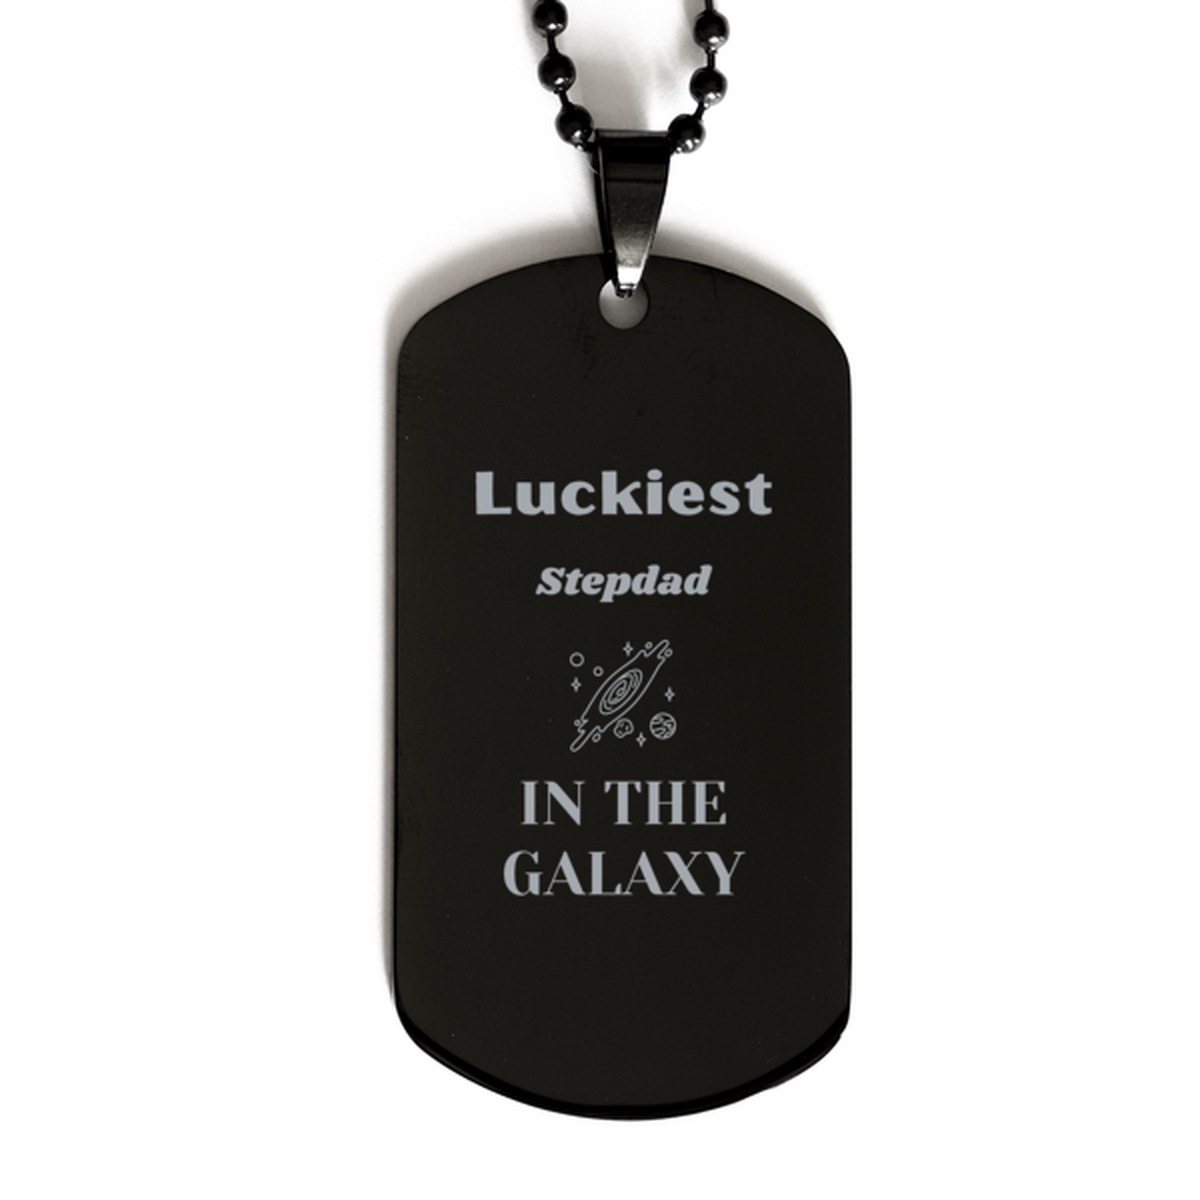 Luckiest Stepdad in the Galaxy, To My Stepdad Engraved Gifts, Christmas Stepdad Black Dog Tag Gifts, X-mas Birthday Unique Gifts For Stepdad Men Women